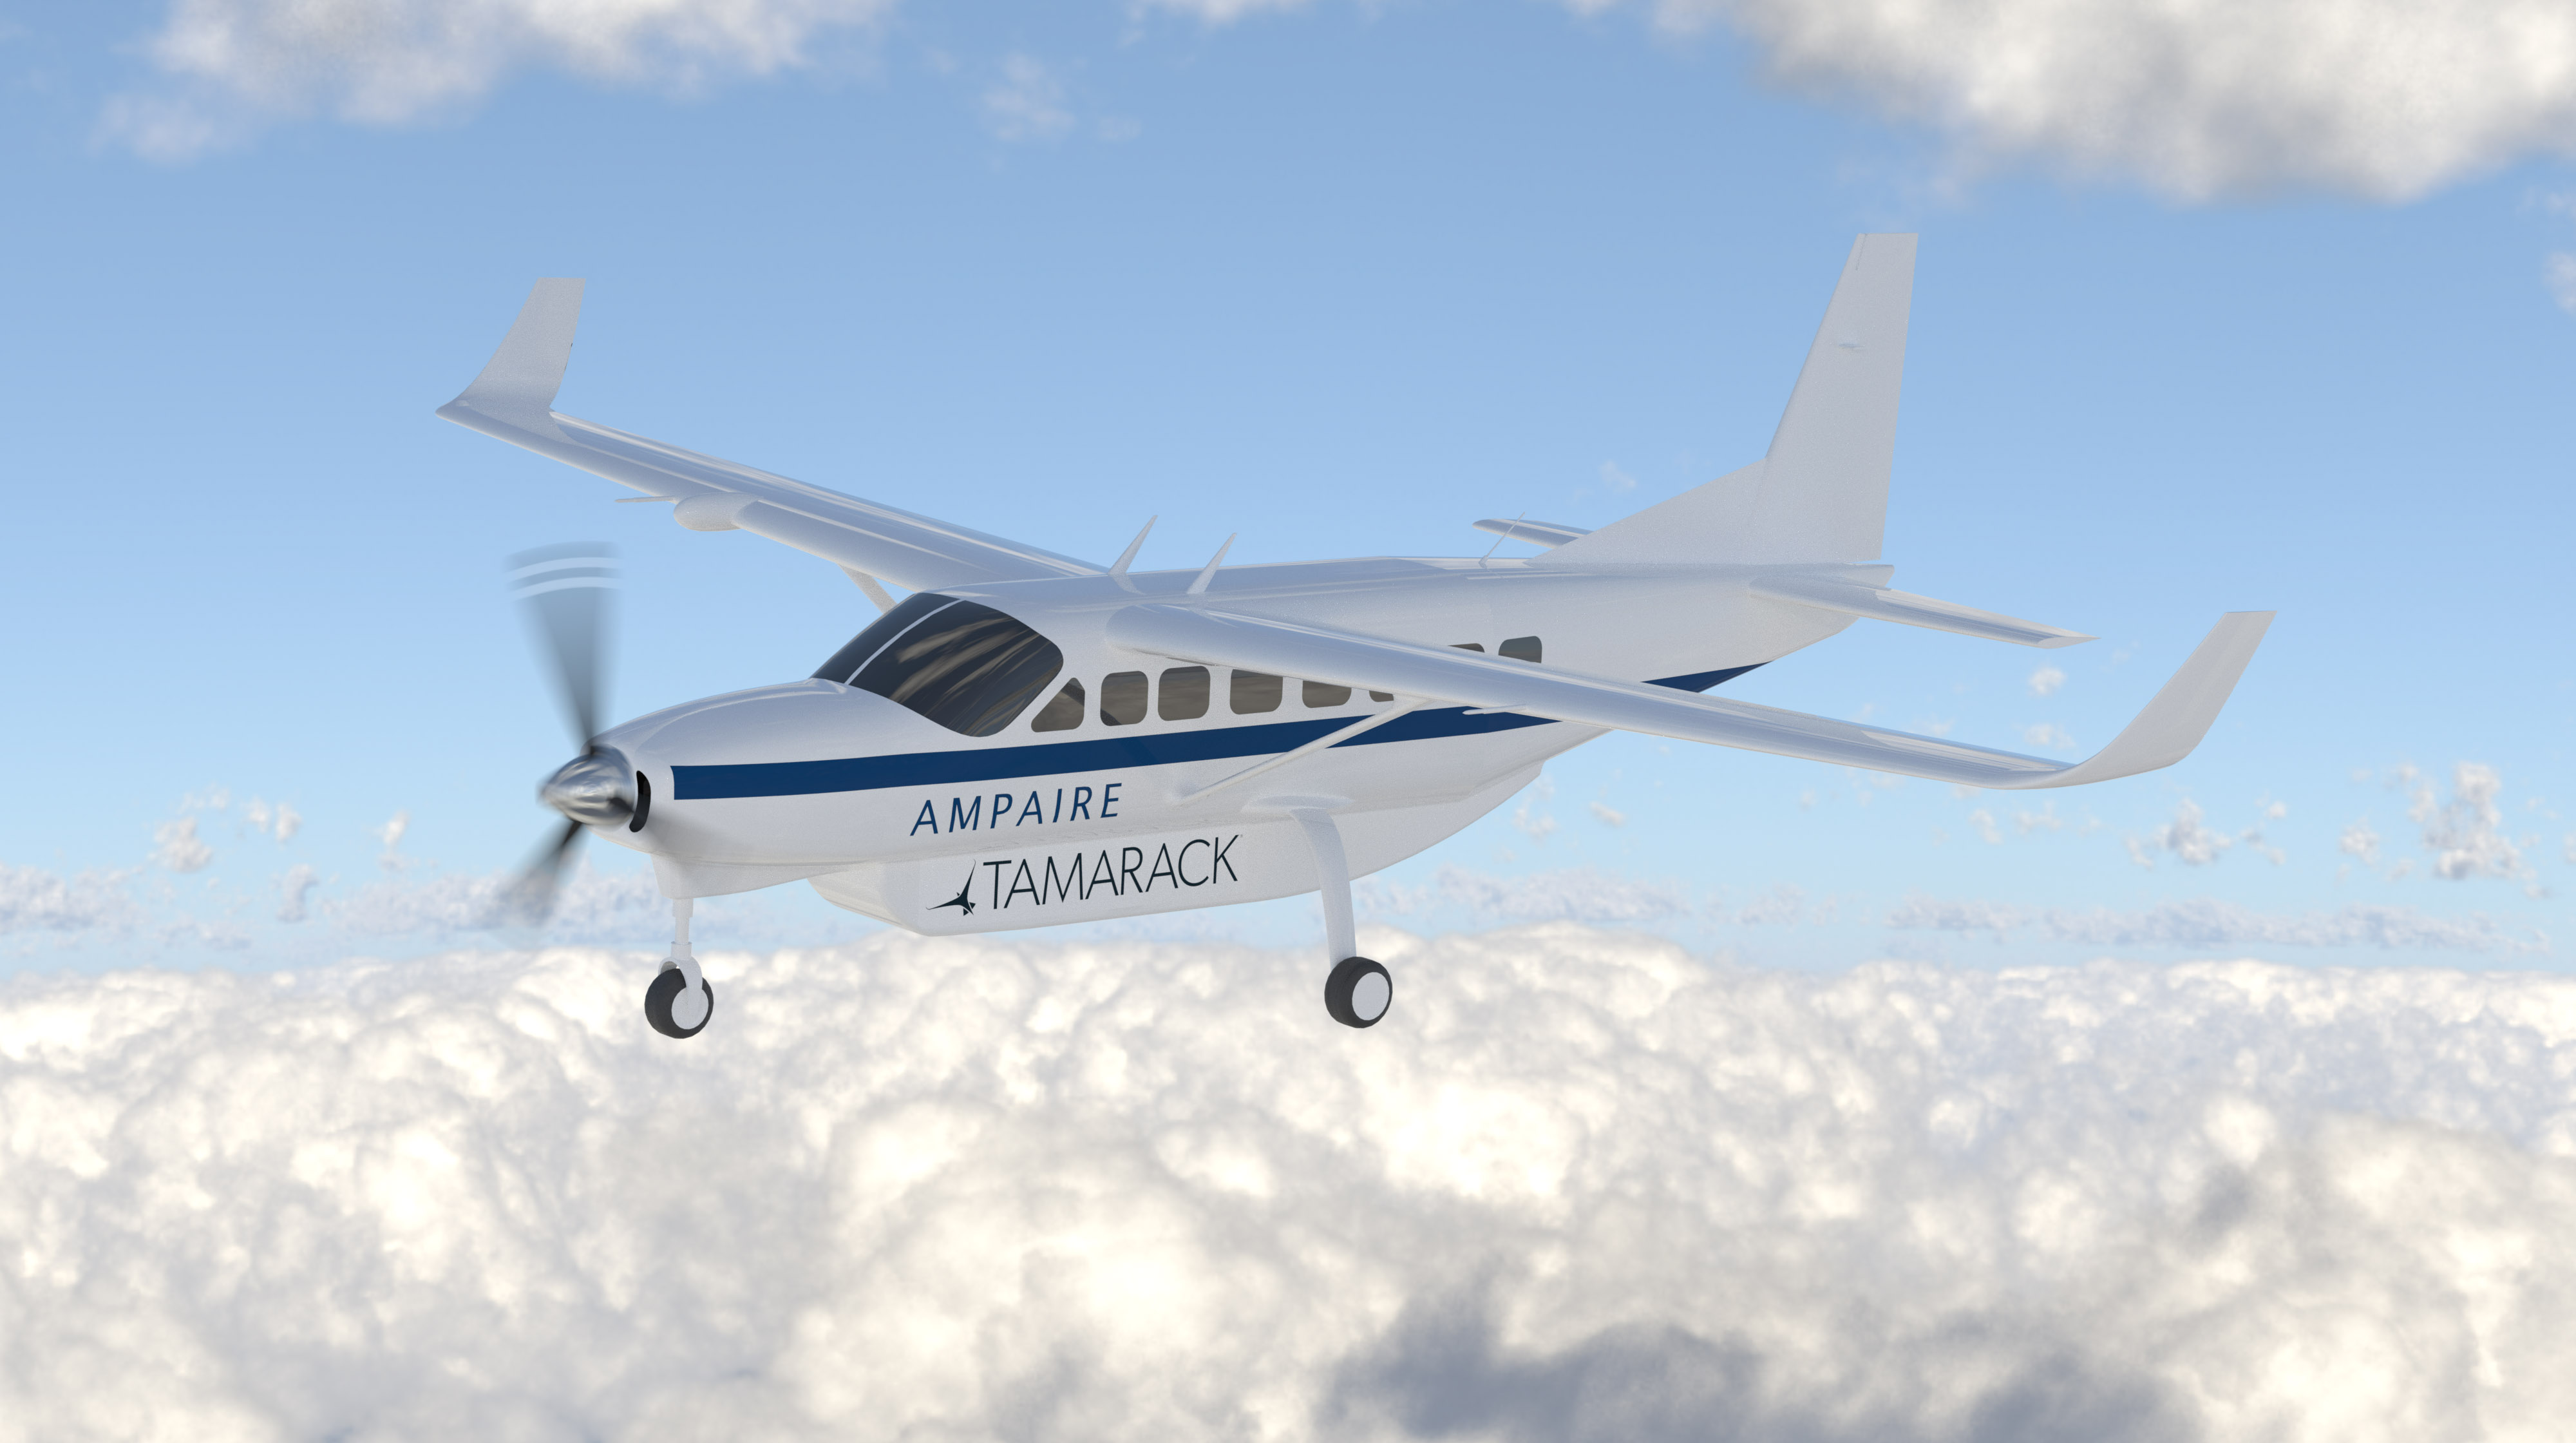 Tamarack, Ampaire to develop winglets for hybrid aircraft - AOPA